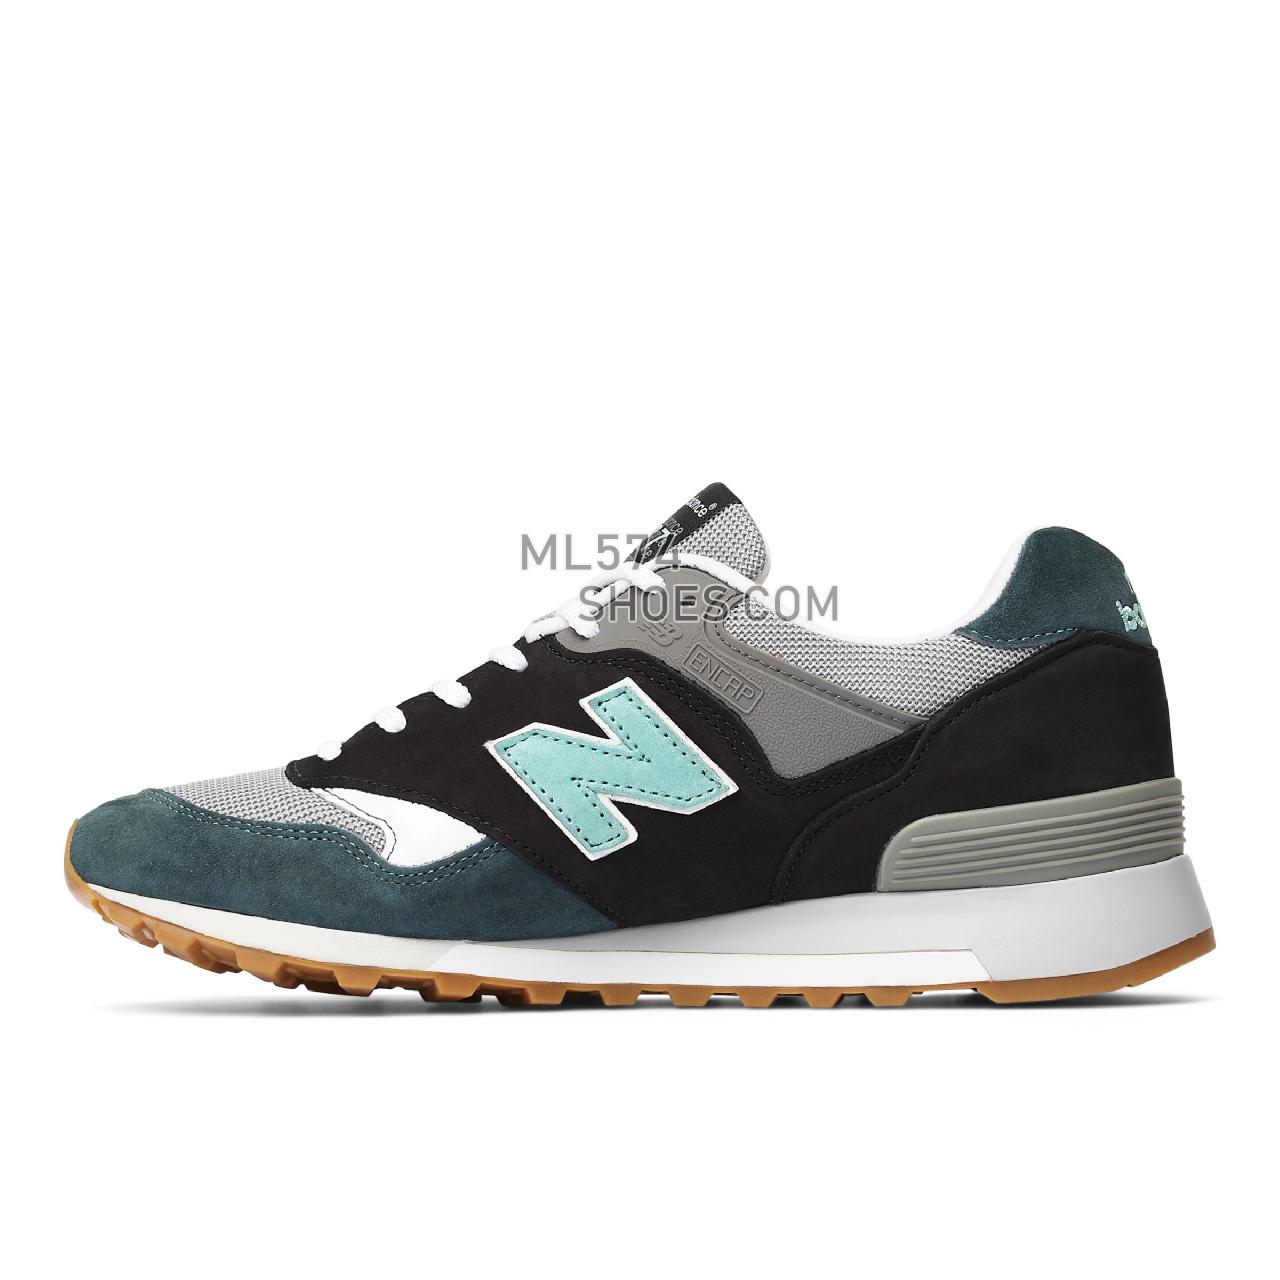 New Balance MADE in UK 577 - Men's Made in USA And UK Sneakers - Black with Grey and Mint - M577LIB